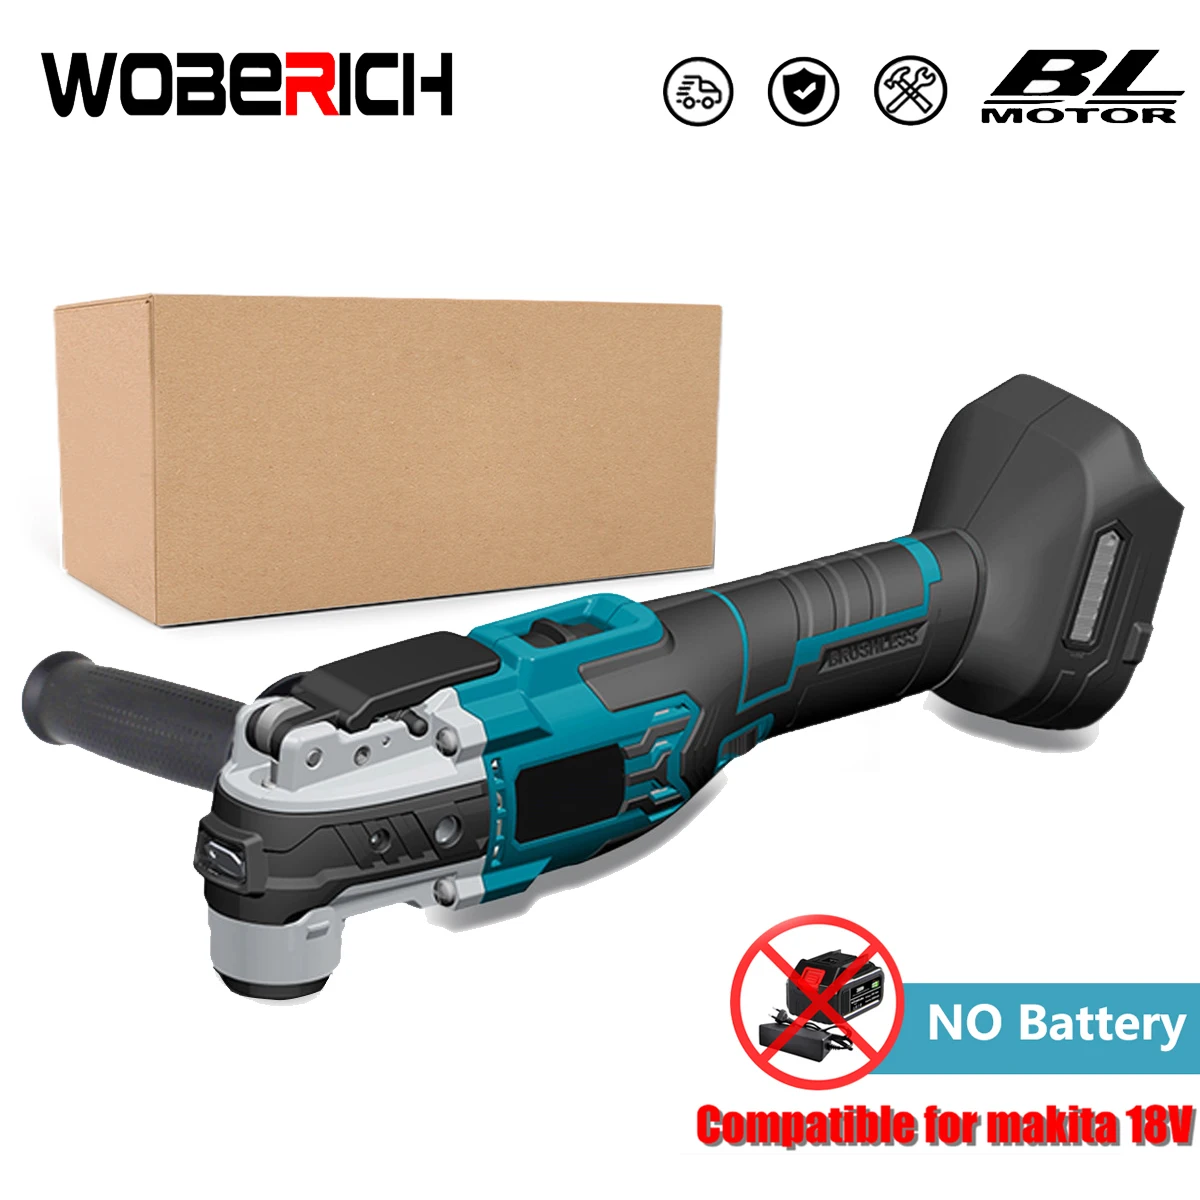 

Brushless Electric Cordless Oscillating Multitools Machine Multi-function Trimmer Saw Renovator Power Multi-Tools For Makita